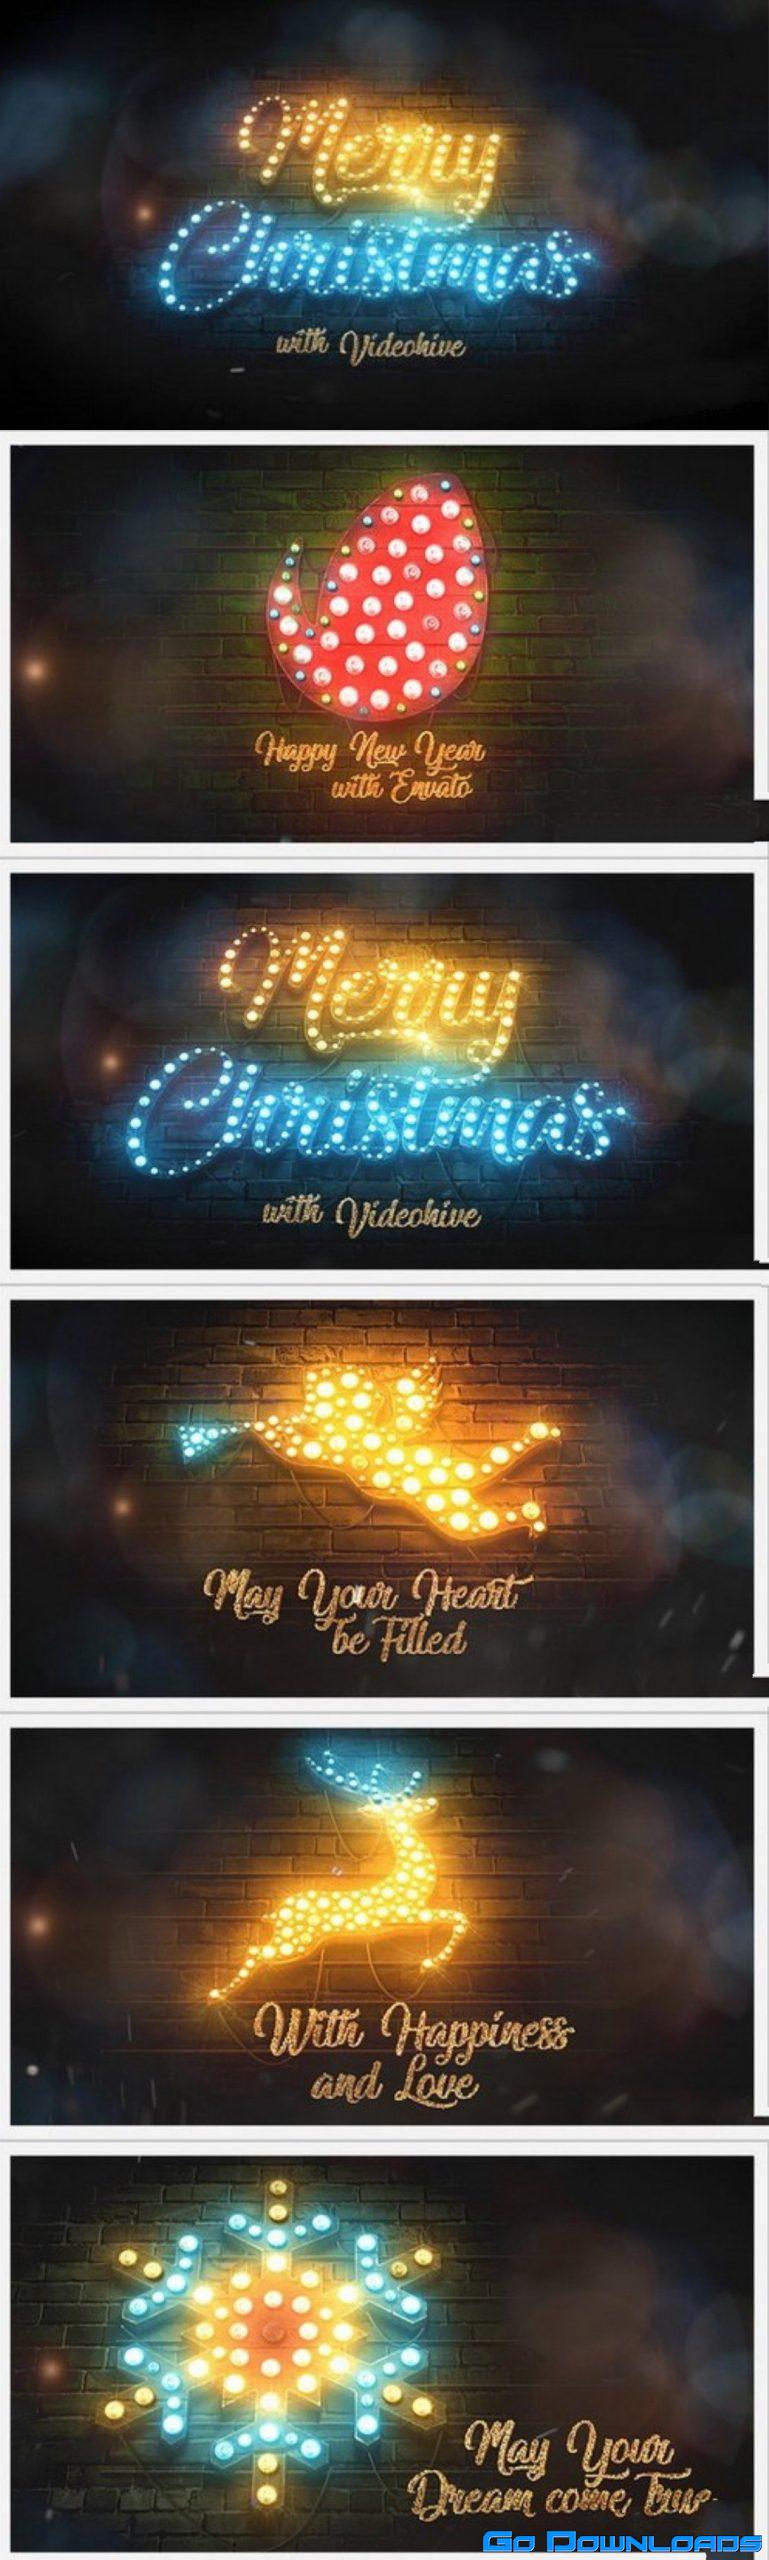 Videohive Merry Christmas Light Bulbs 29516457 Free Download